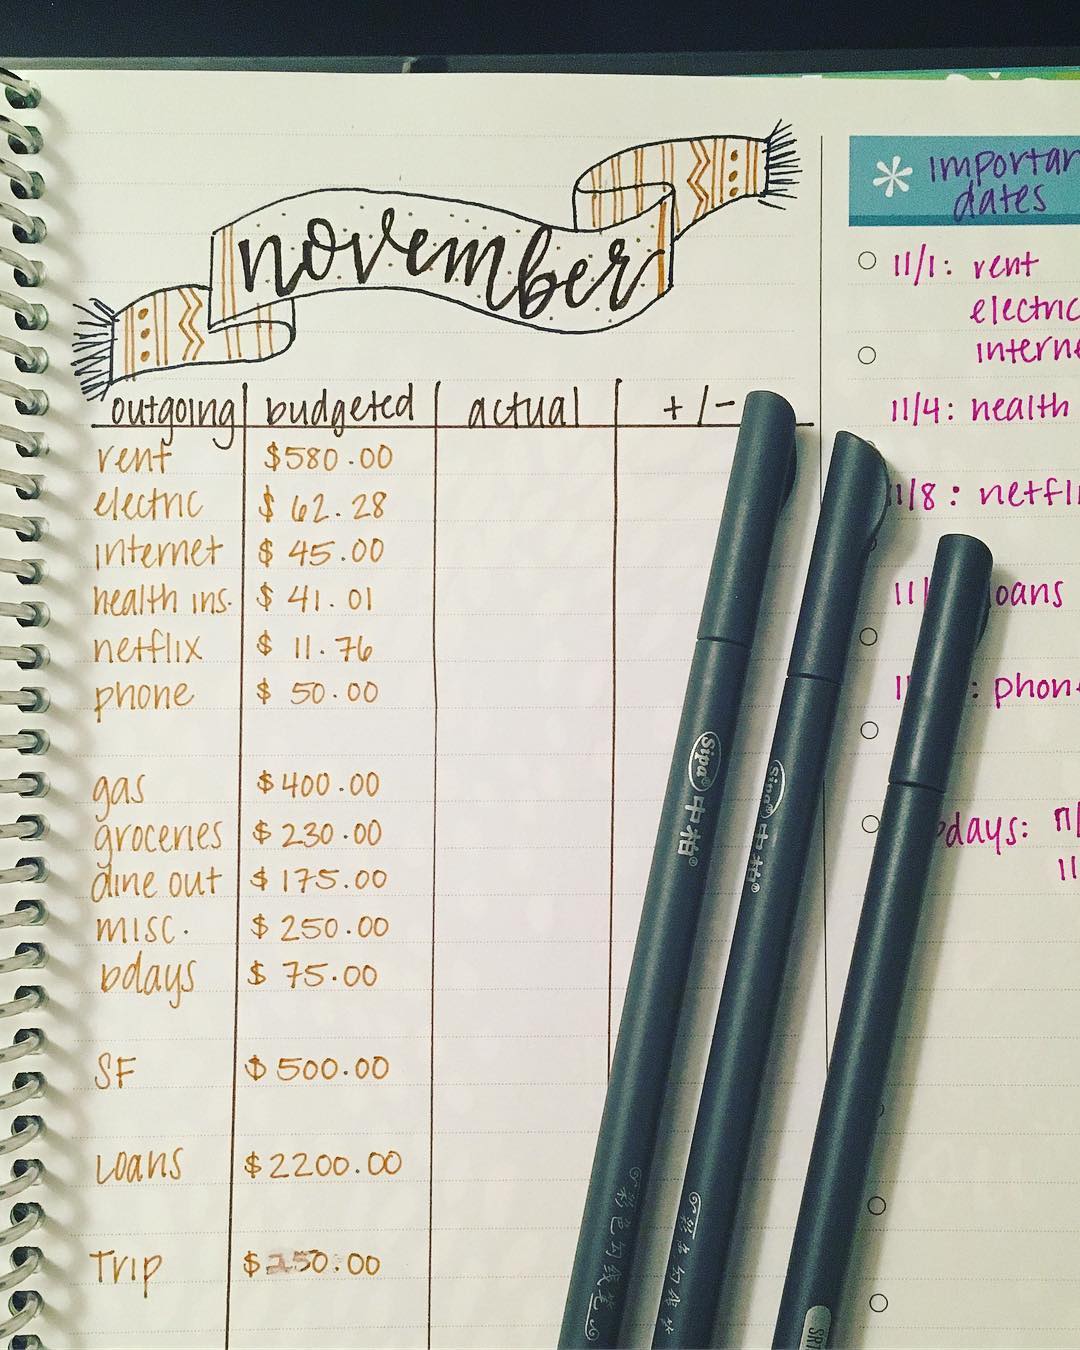 Planner with a Budget for Living Expenses. Photo by Instagram user @chelliesaves